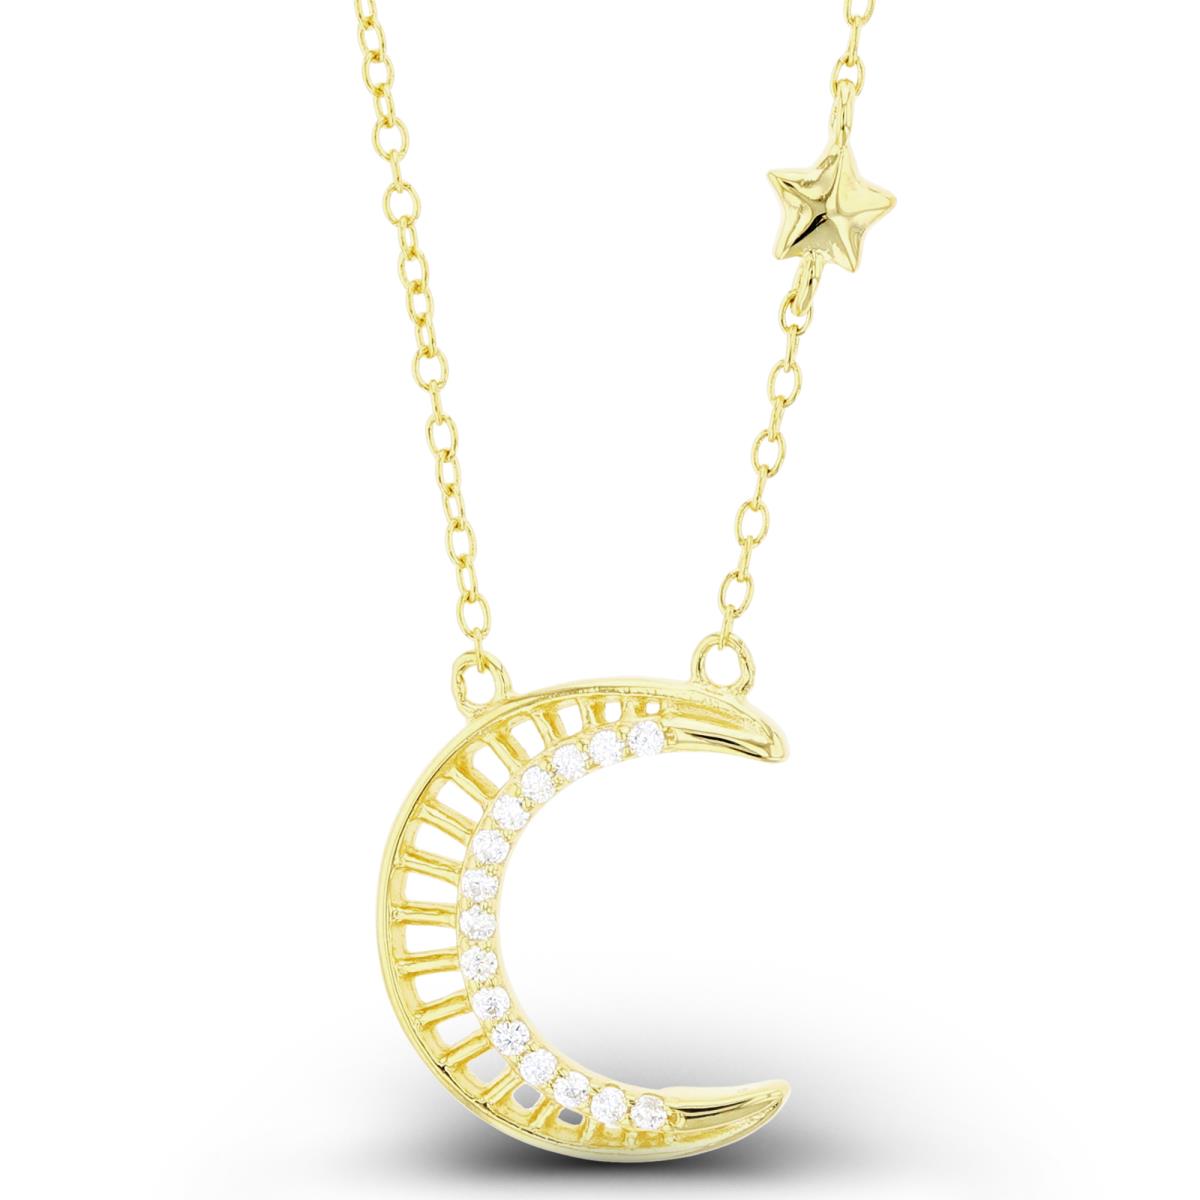 Sterling Silver+1Micron Yellow Gold Rnd White CZ Textured Moon & High Polish Stars Station 16+2"Necklace